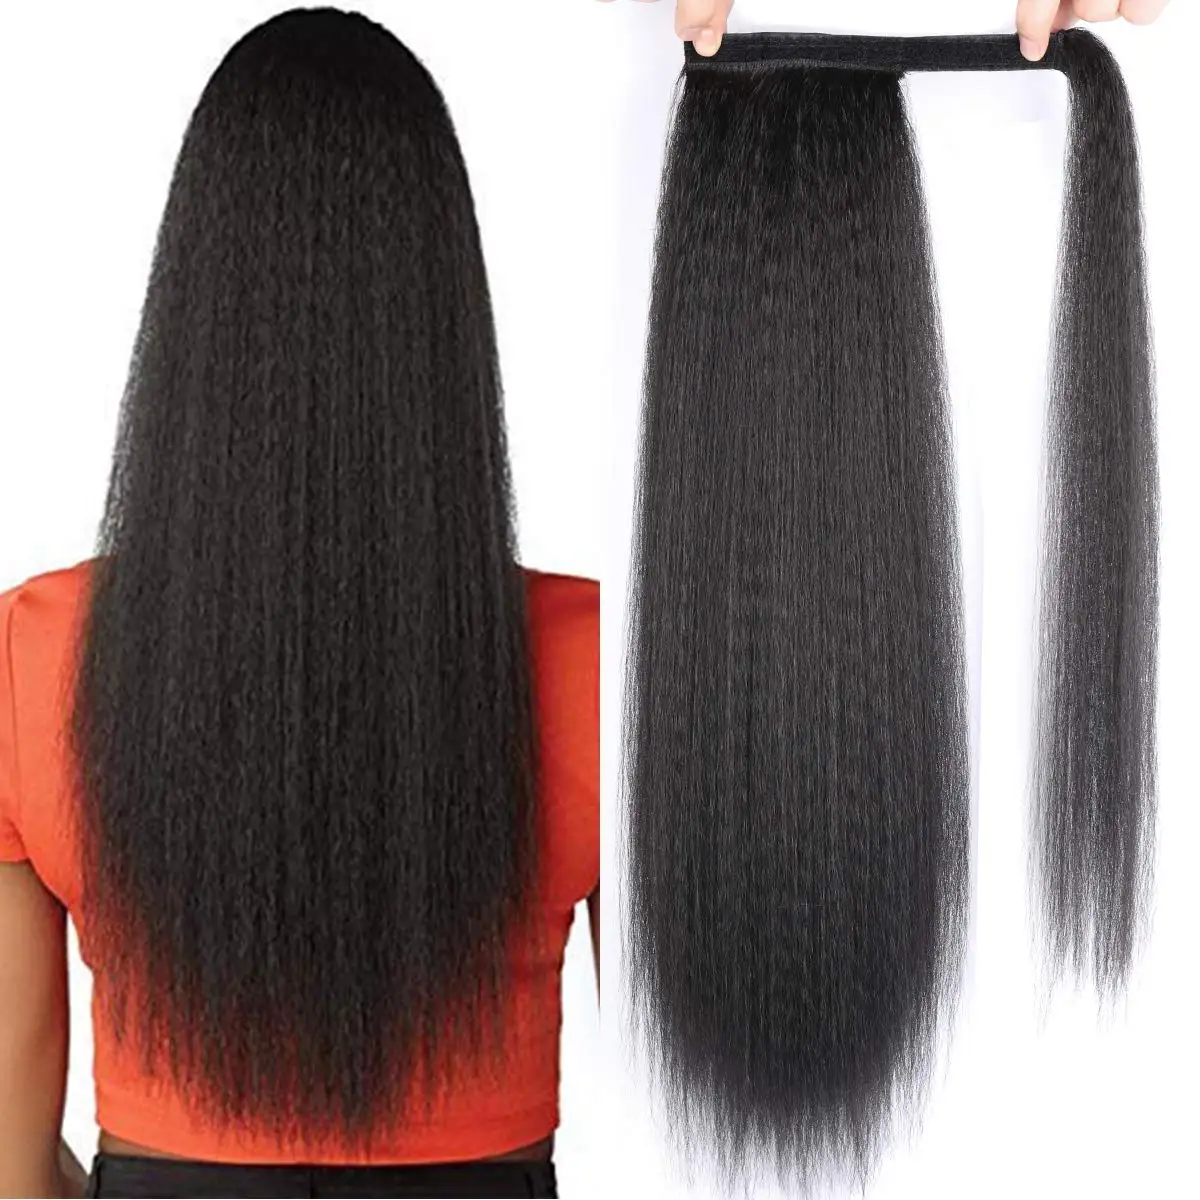 

24 Inch Synthetic Fiber Long Straight Cheap Instant Clip In Wrap Around Hair Extension Ponytail, Pic showed